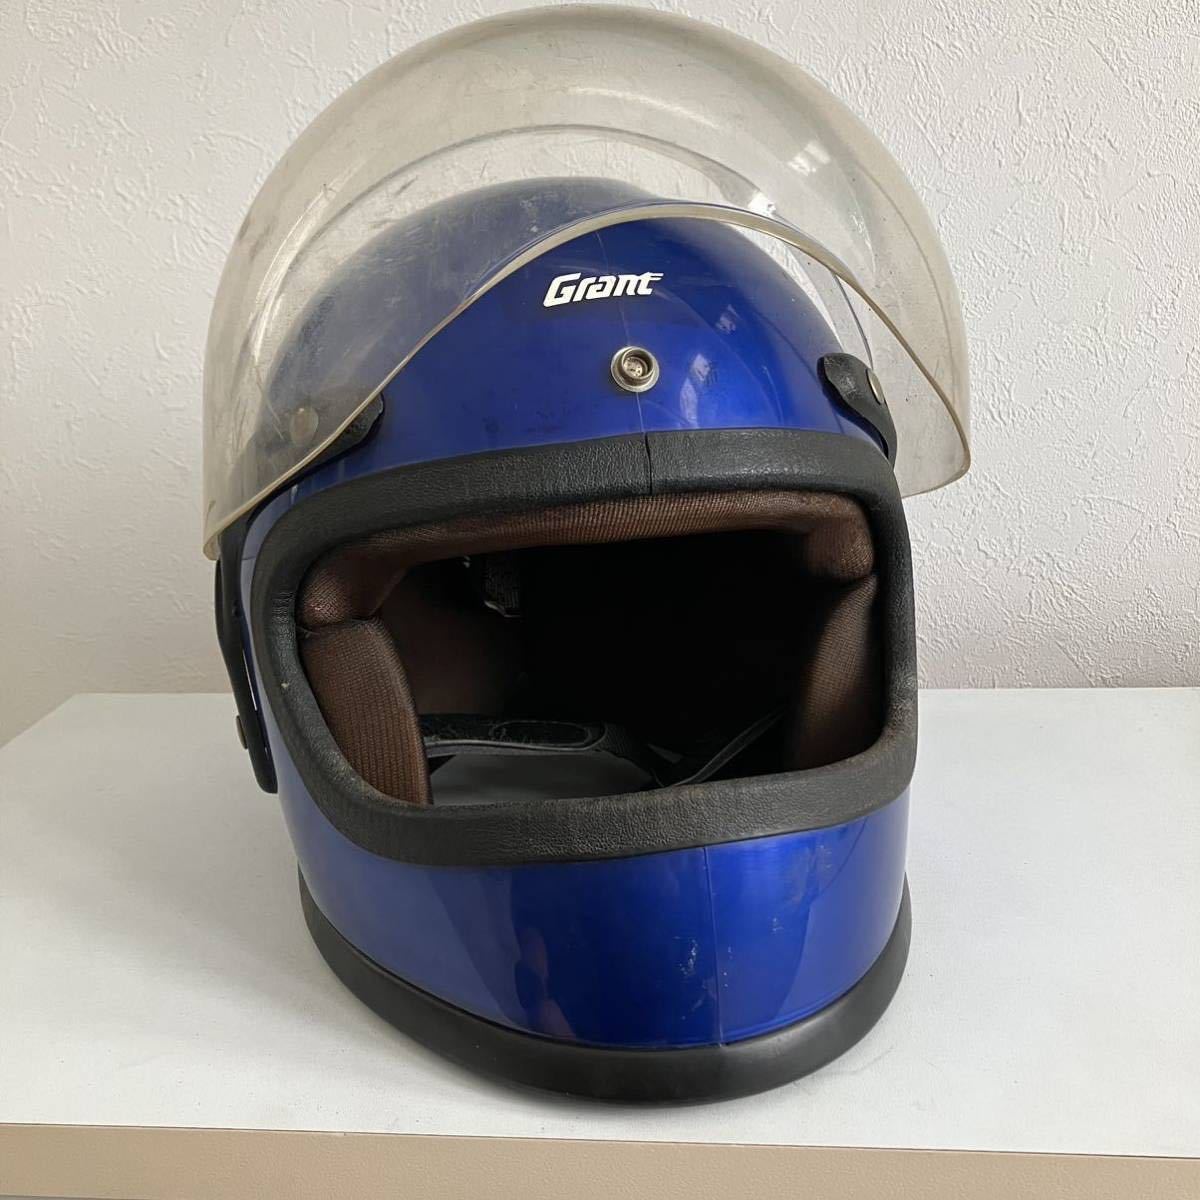 GRANT*S-M size vintage helmet 80 period blue rare old car Harley full-face group hell alive louver ikUSA Sapporo MOTORS INC